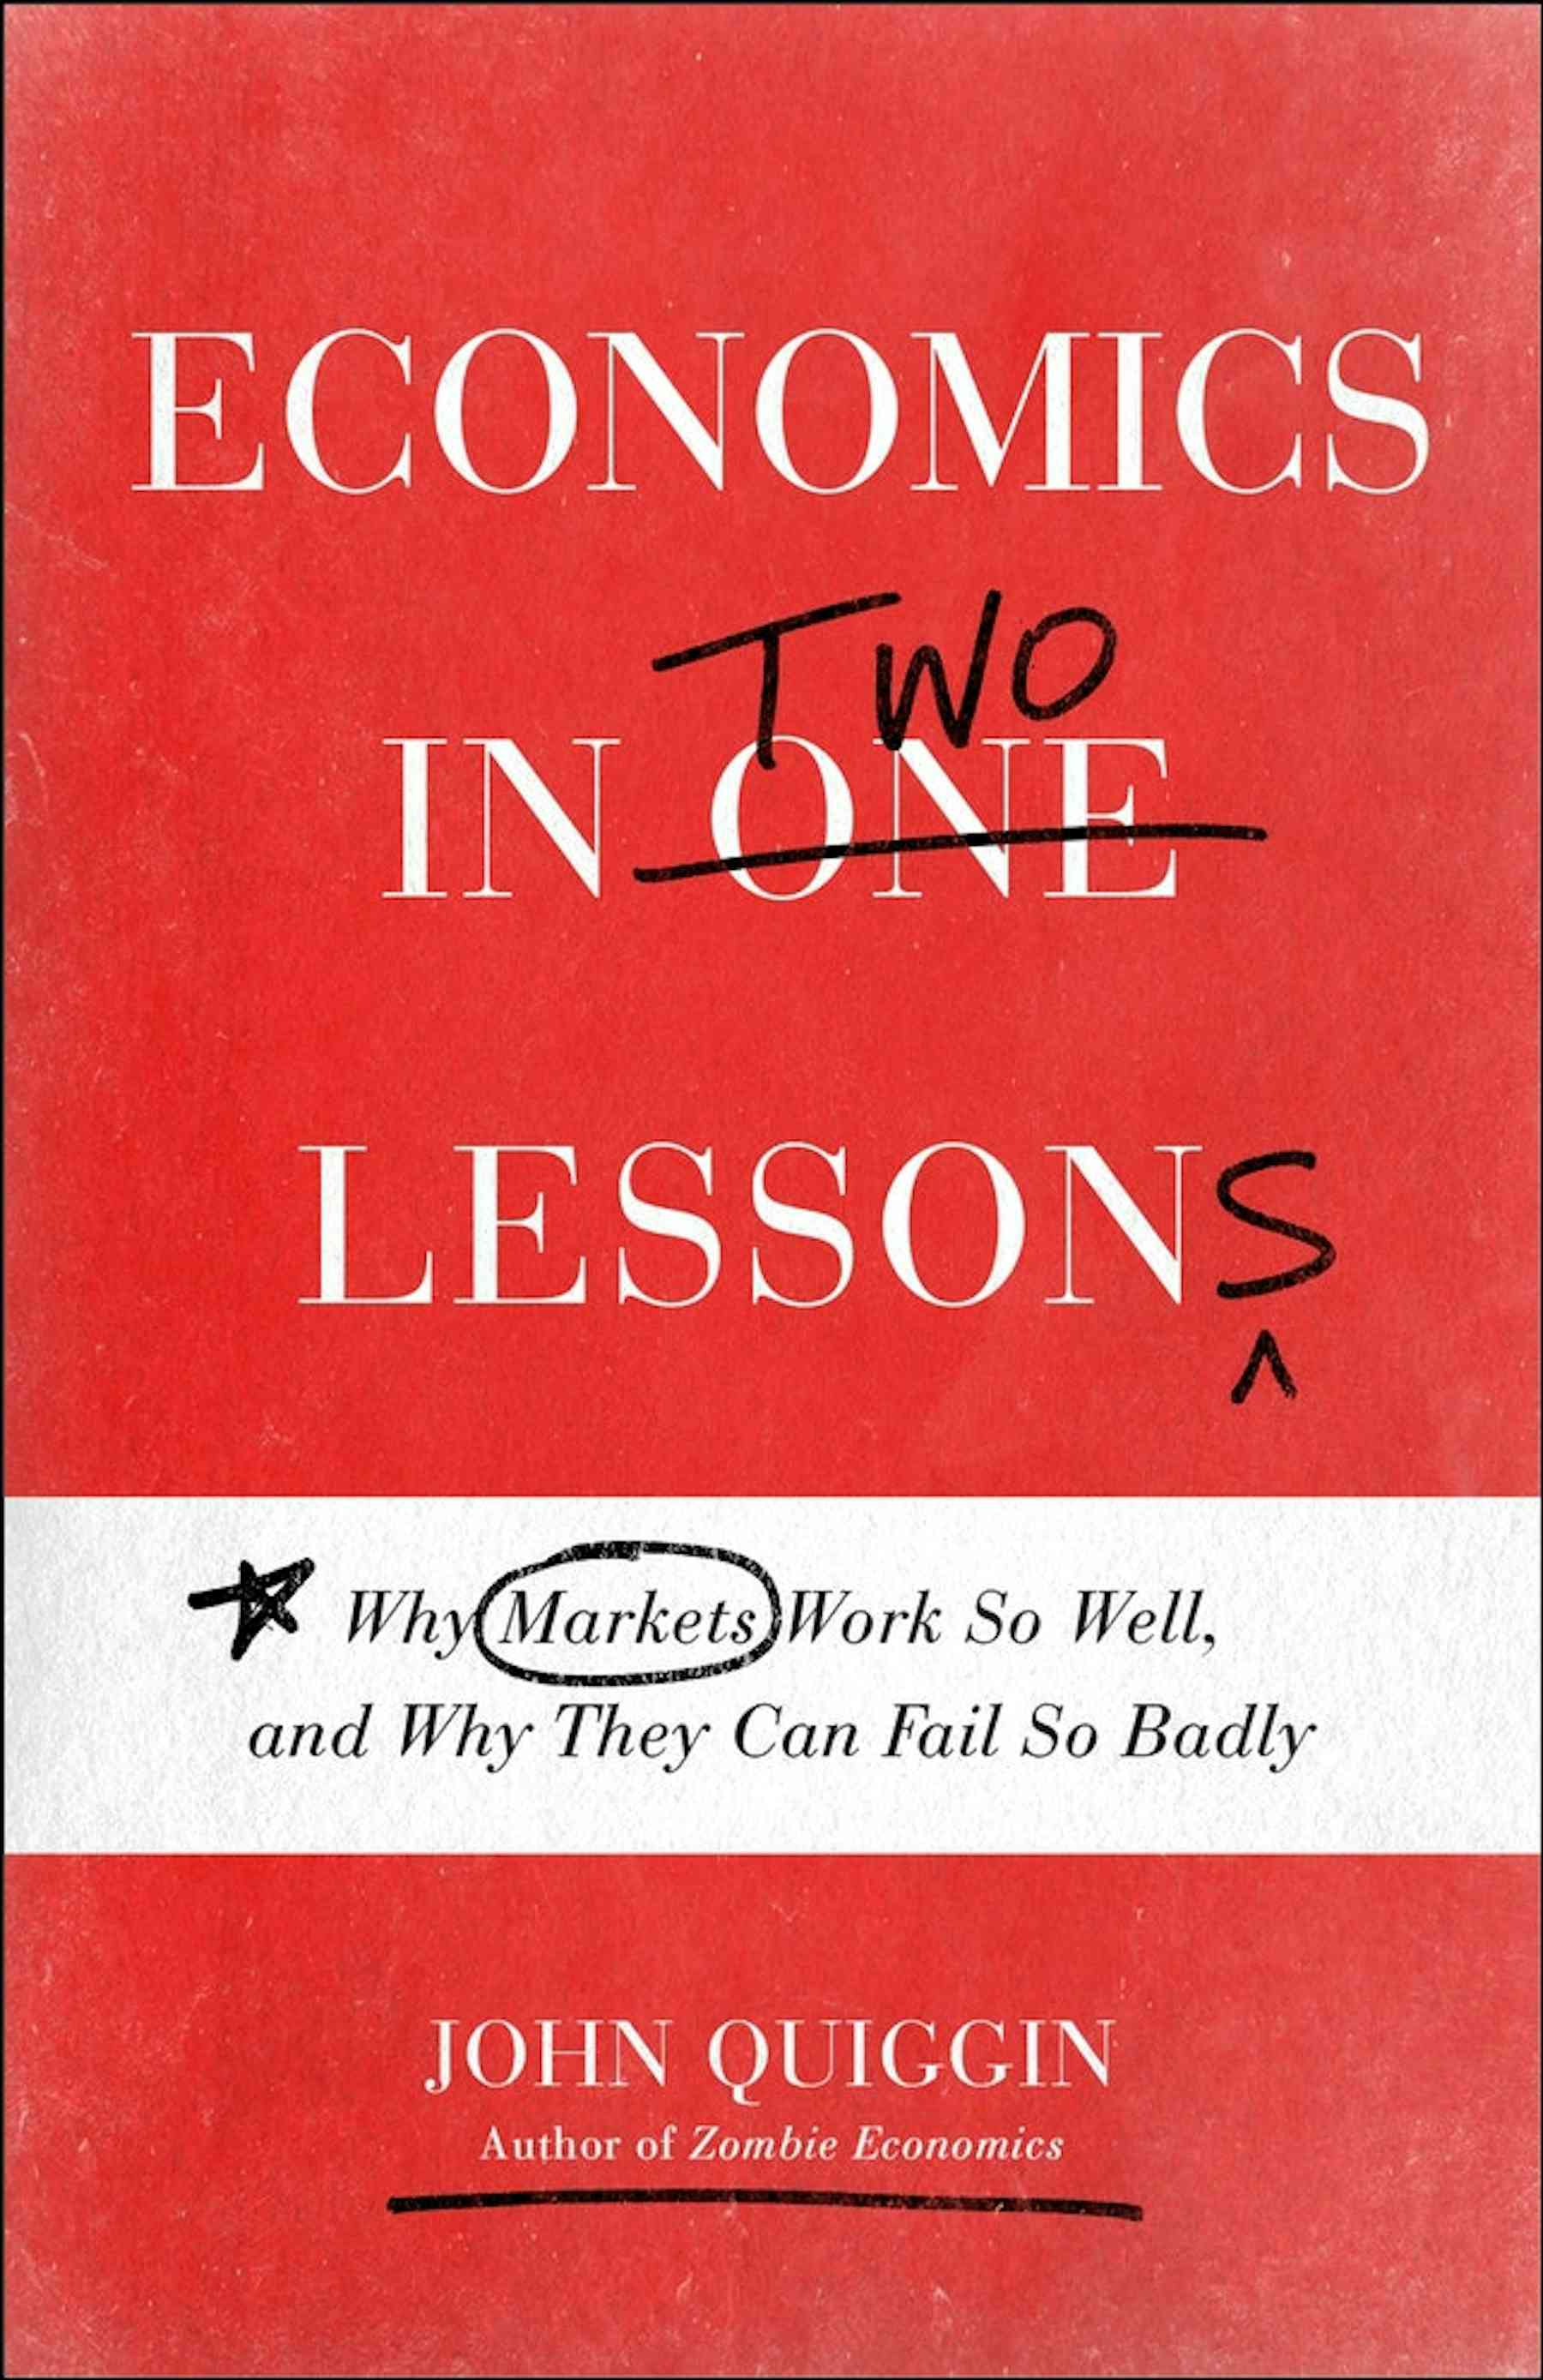 economics books to read for personal statement